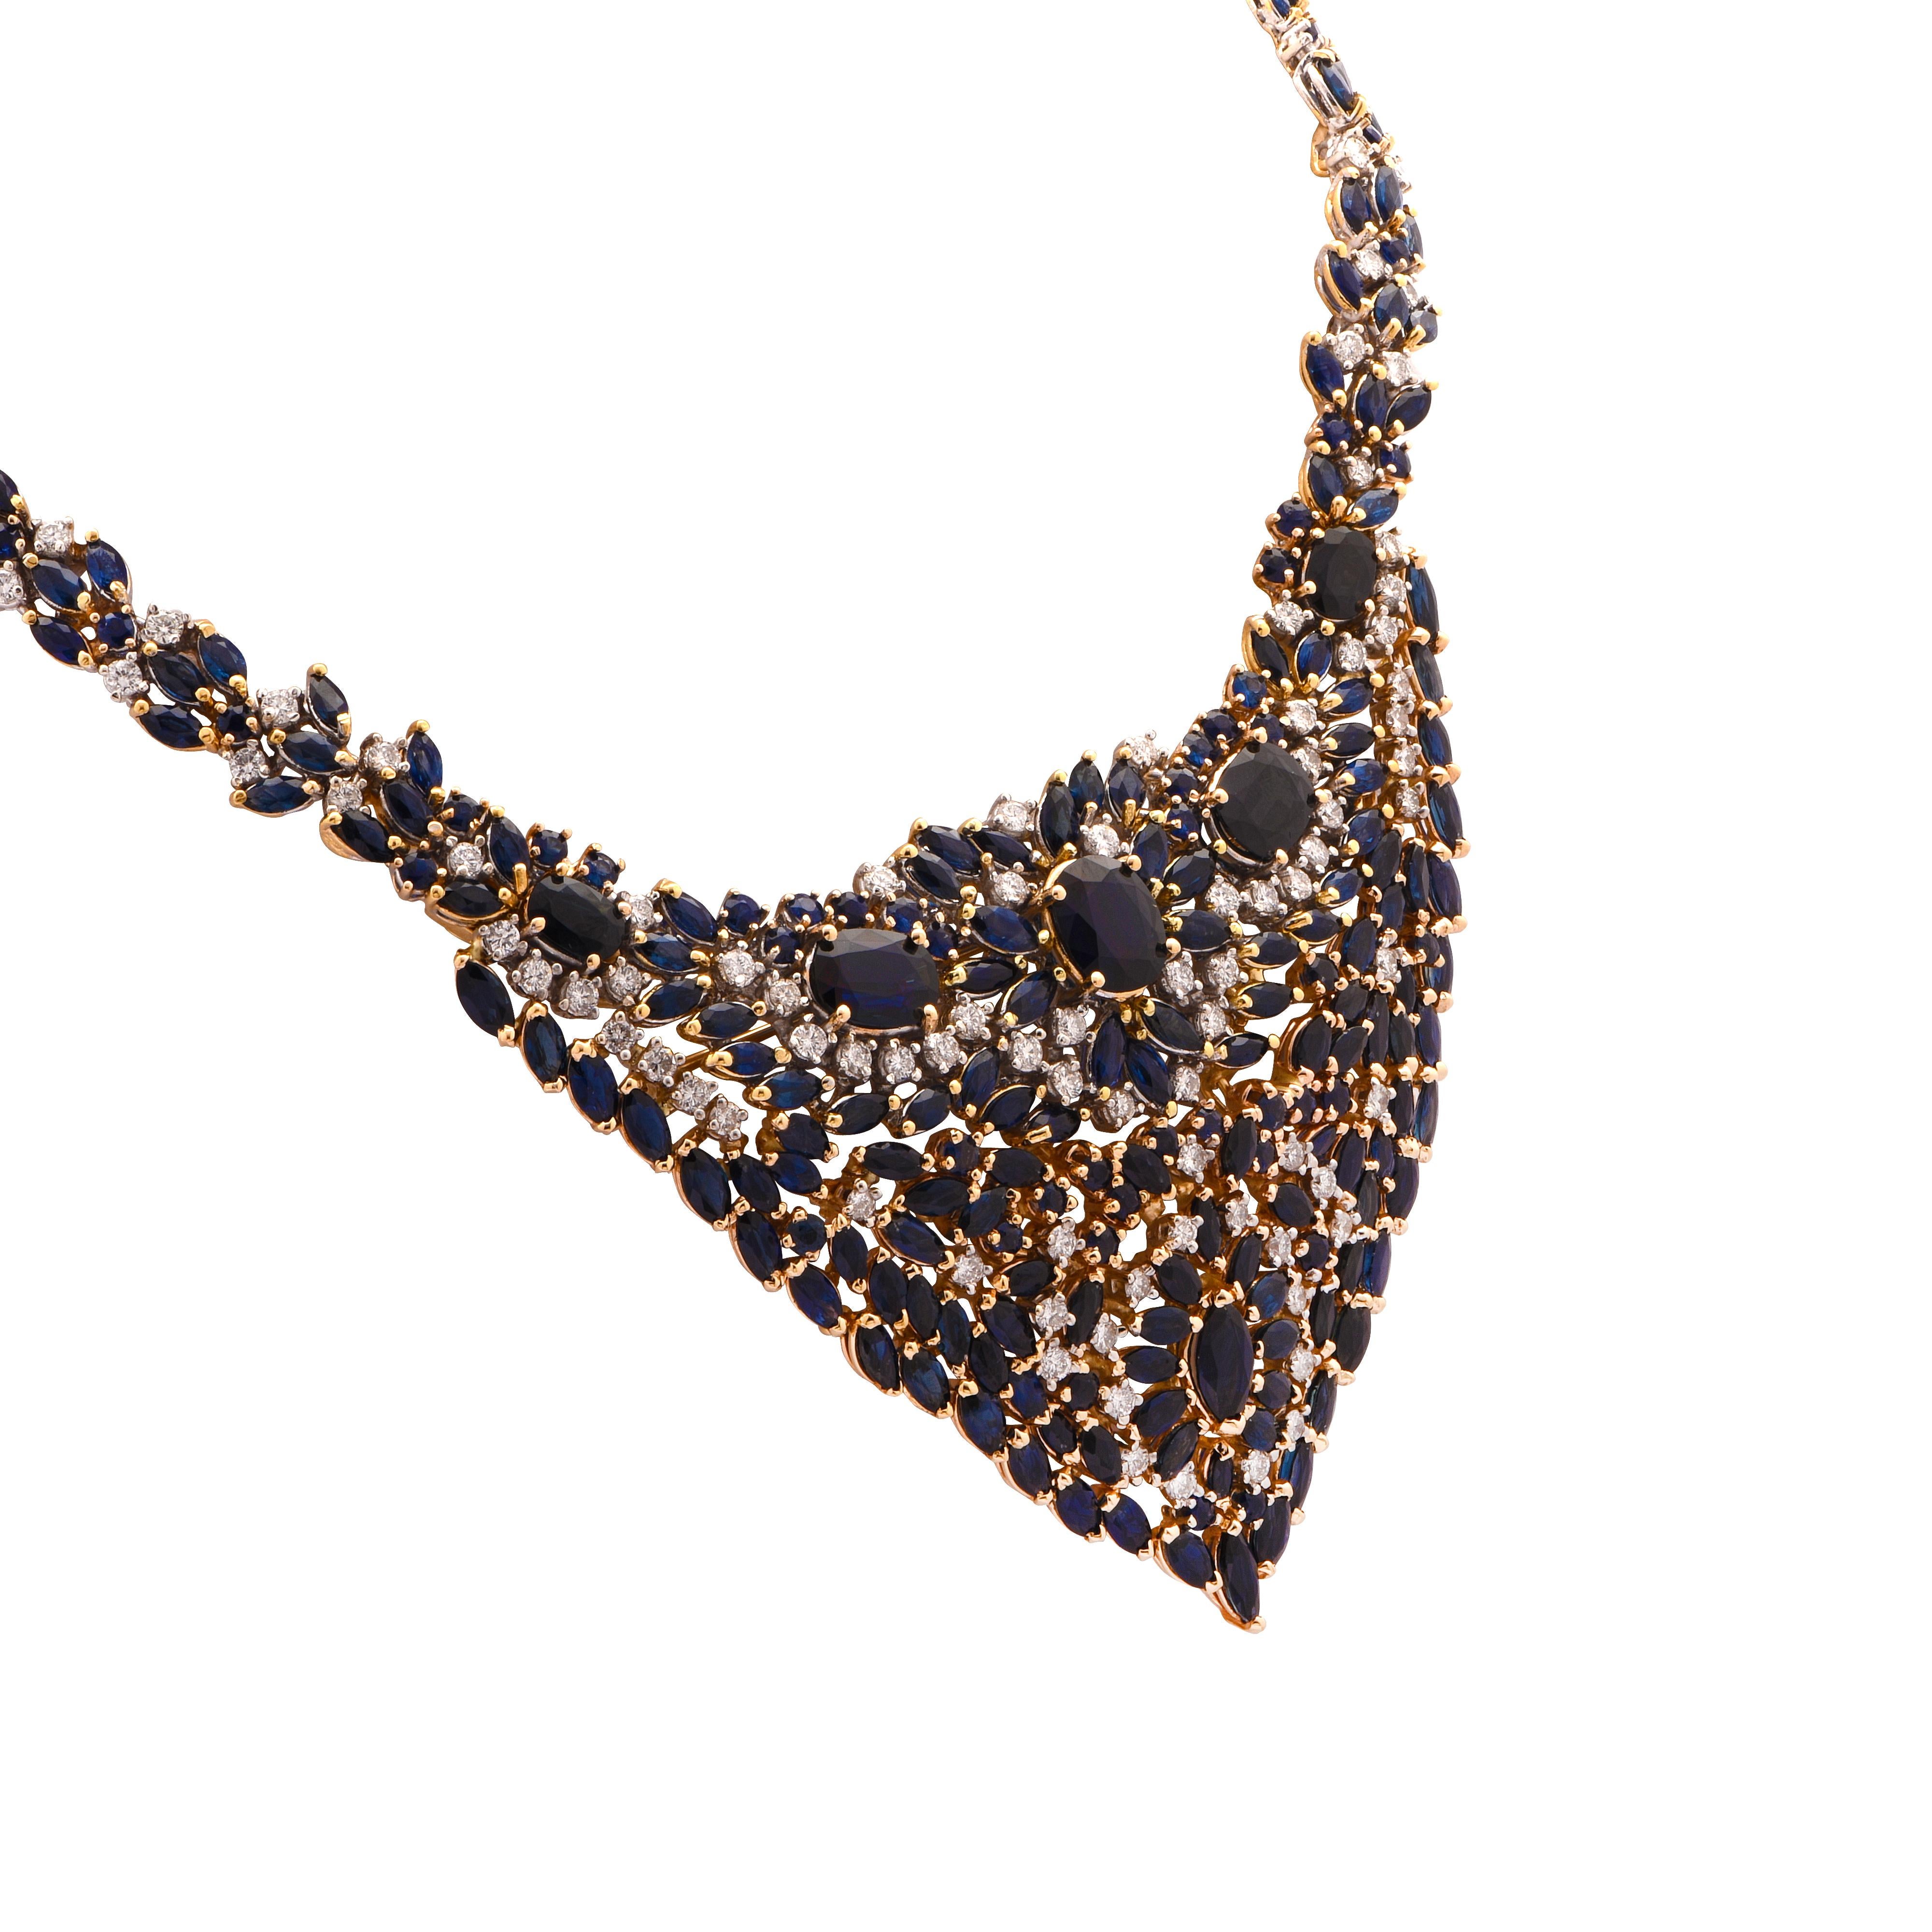 Striking Bib necklace crafted in yellow gold showcasing 87 round brilliant cut diamonds weighing approximately 5 carats total, G color, VS-SI color, and 143 mixed cut sapphires weighing approximately 25 carats total set in an eye-catching array. By